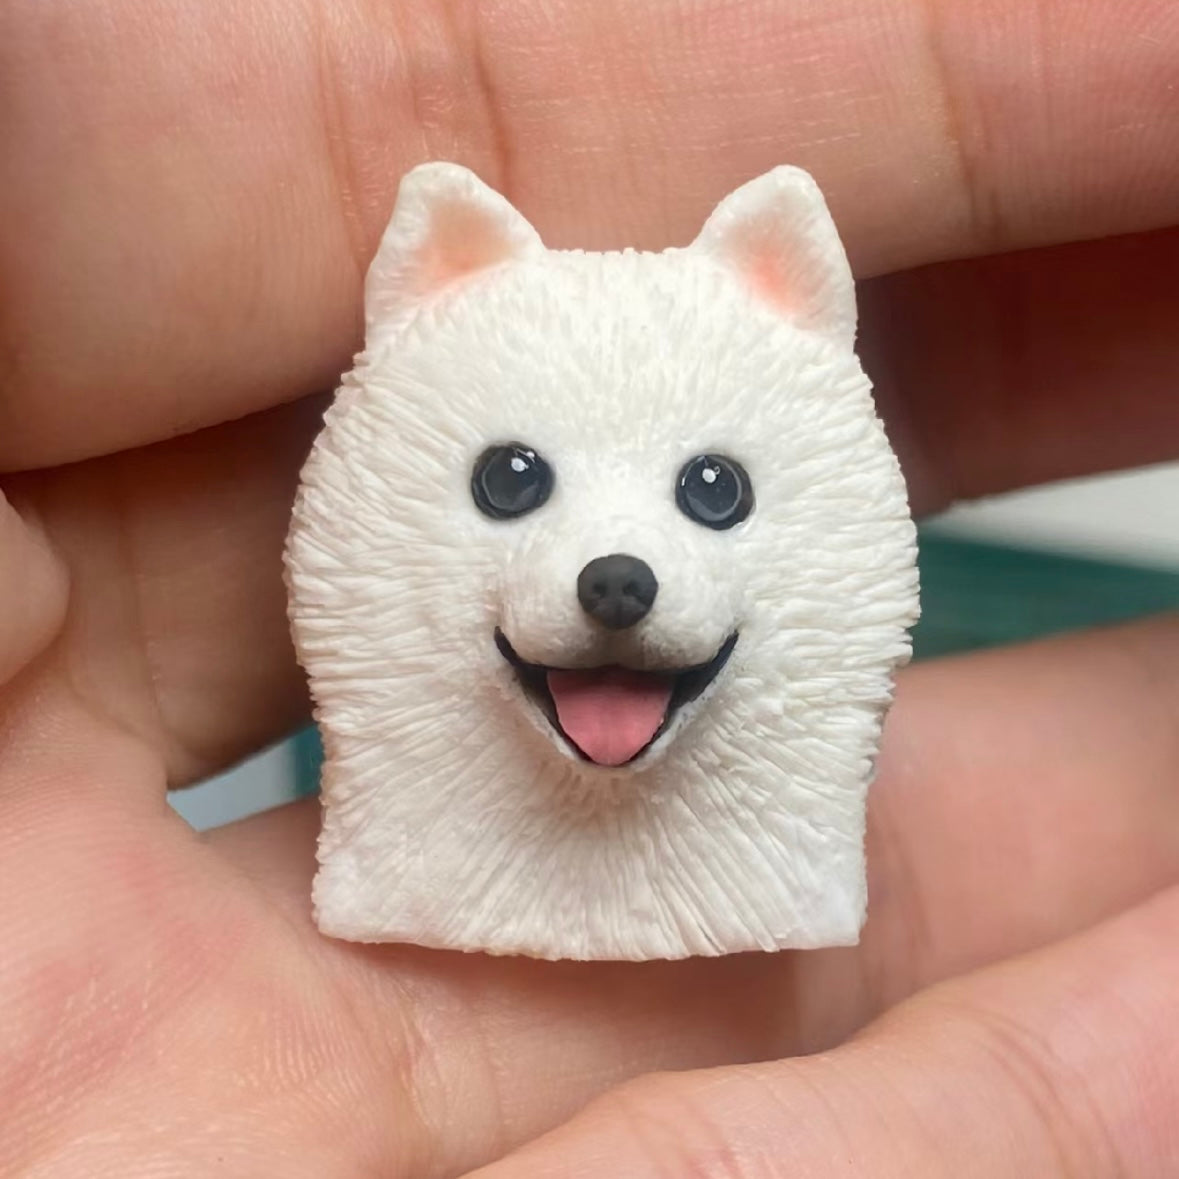 Artisan-Keycaps-for-Cats-and-Dogs-Customize-your-artisan-keycaps_8_9